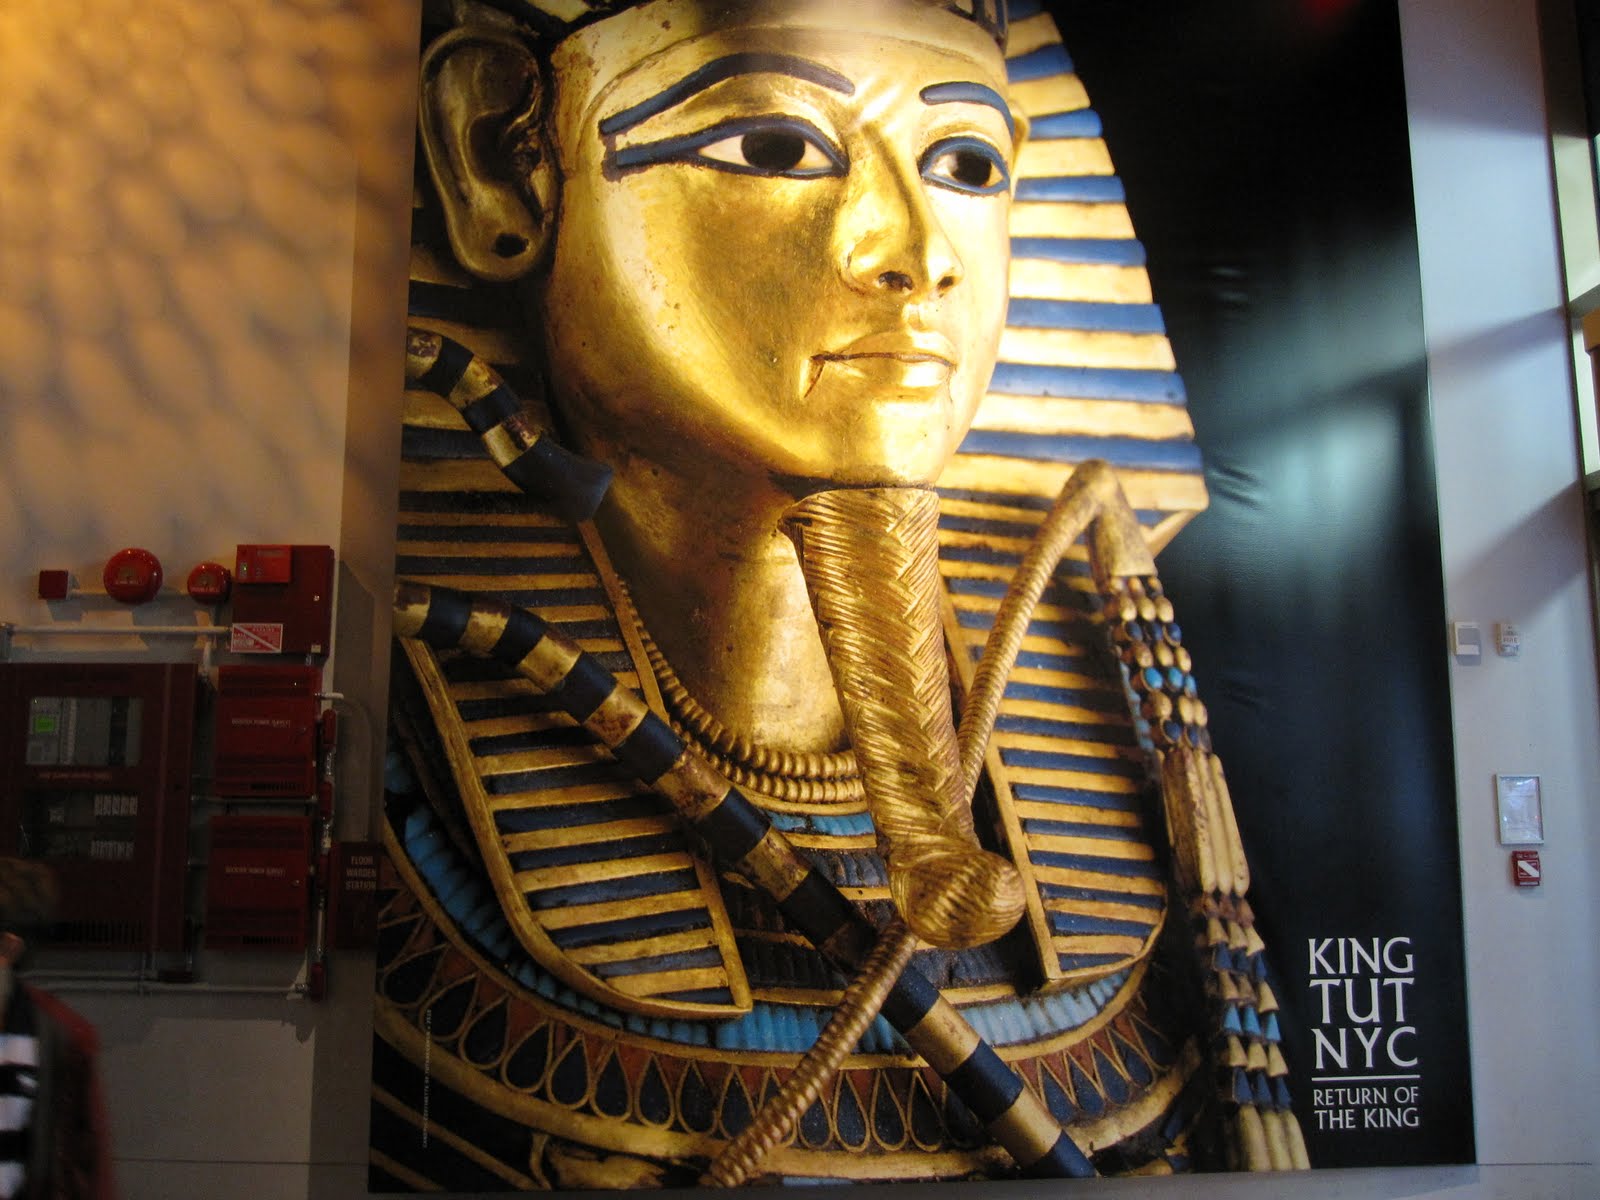 Learning Journeys In Us For Curriculum Design Tutankhamun And The Golden Age Of The Pharaohs